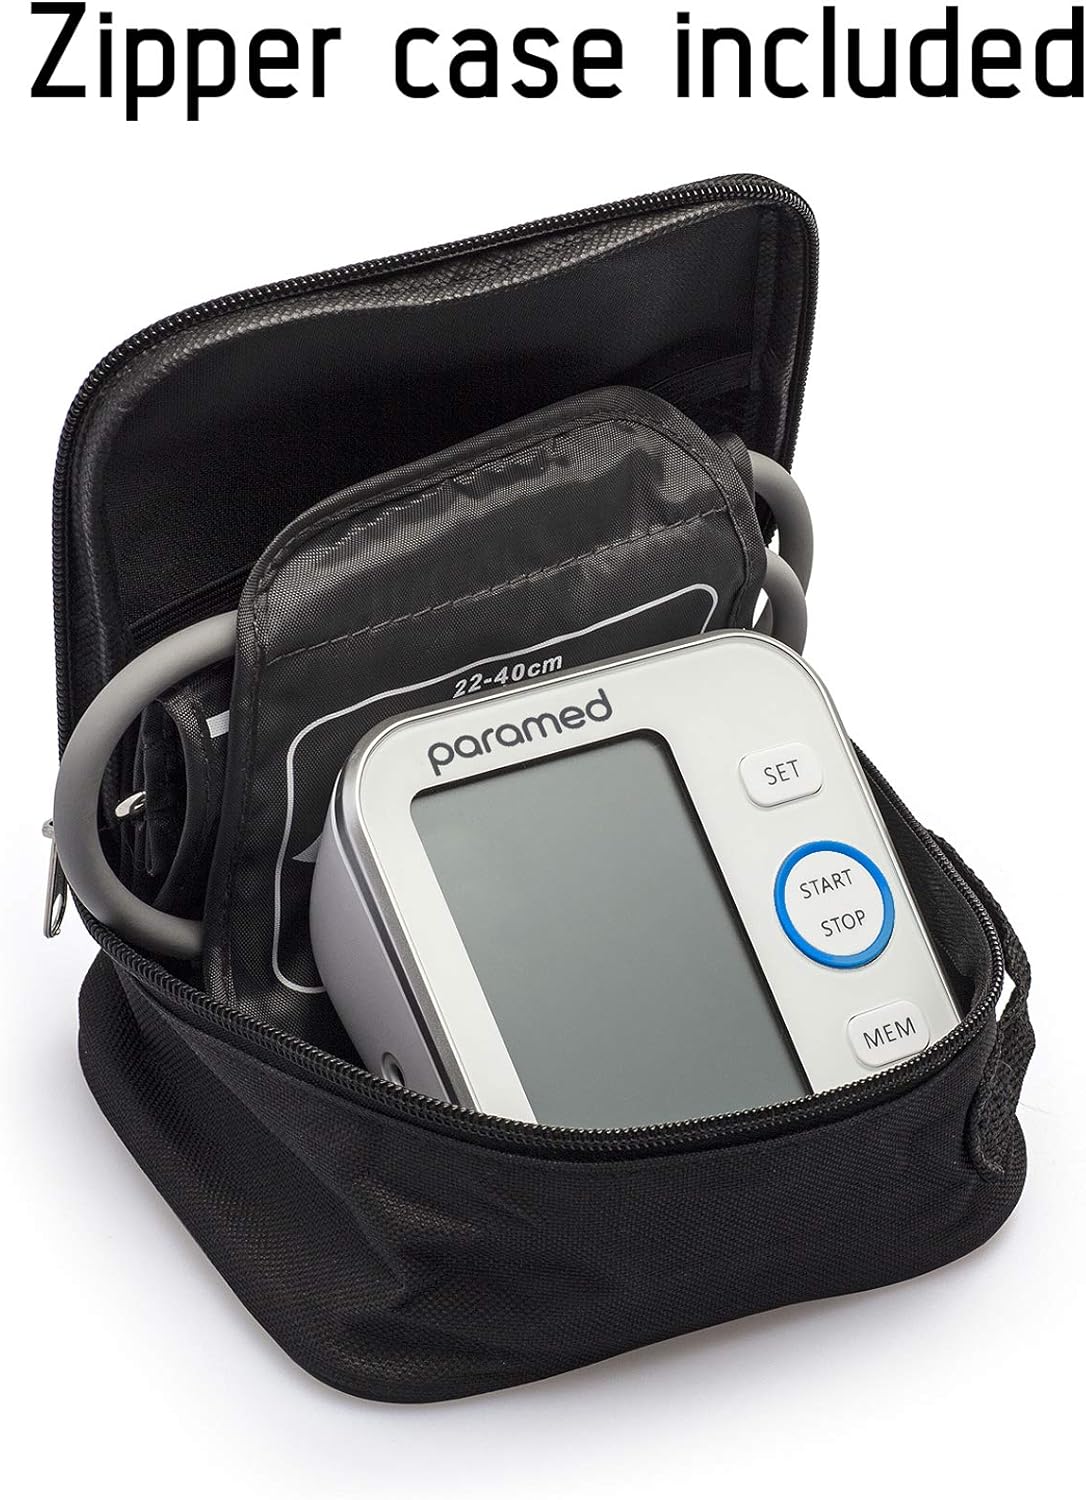 Paramed Blood Pressure Monitor - Bp Machine - Automatic Upper Arm Blood Pressure Cuff 8.7-15.7 inches - Large LCD Display 120 Sets Memory - Device Bag Batteries Included